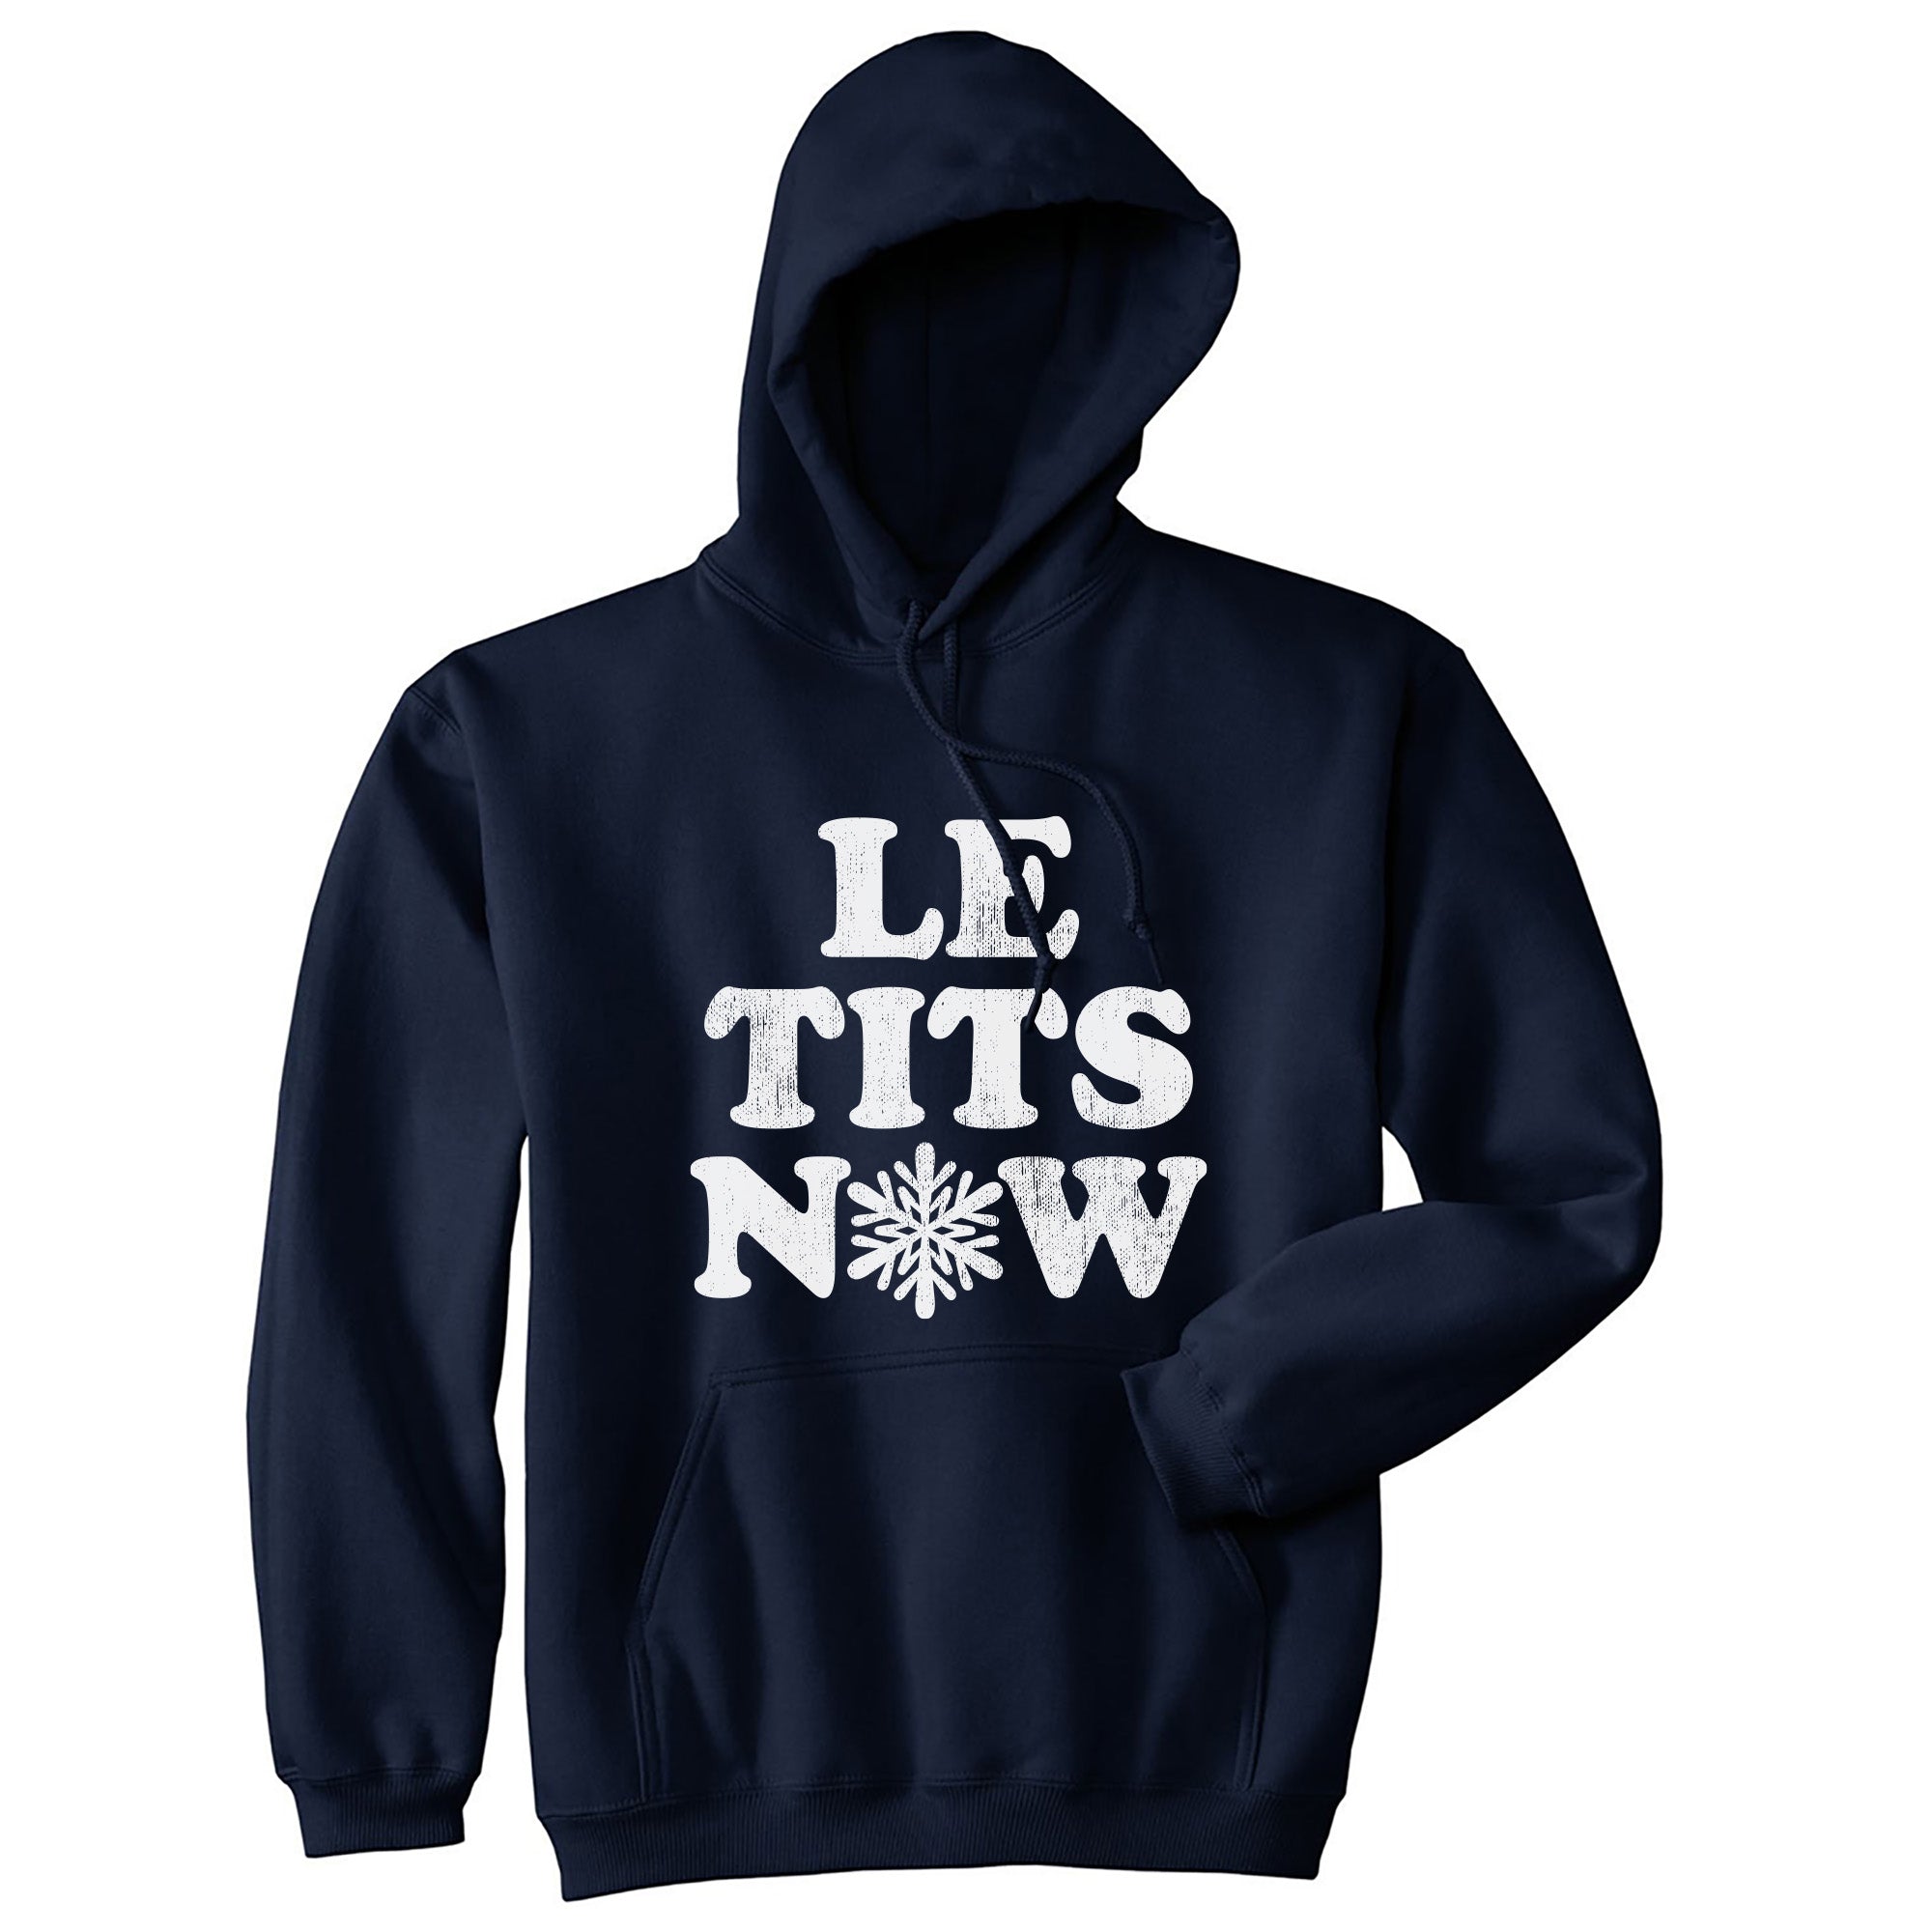 Funny Navy - Le Tits Le Tits Now Hoodie Nerdy Christmas Sarcastic Tee